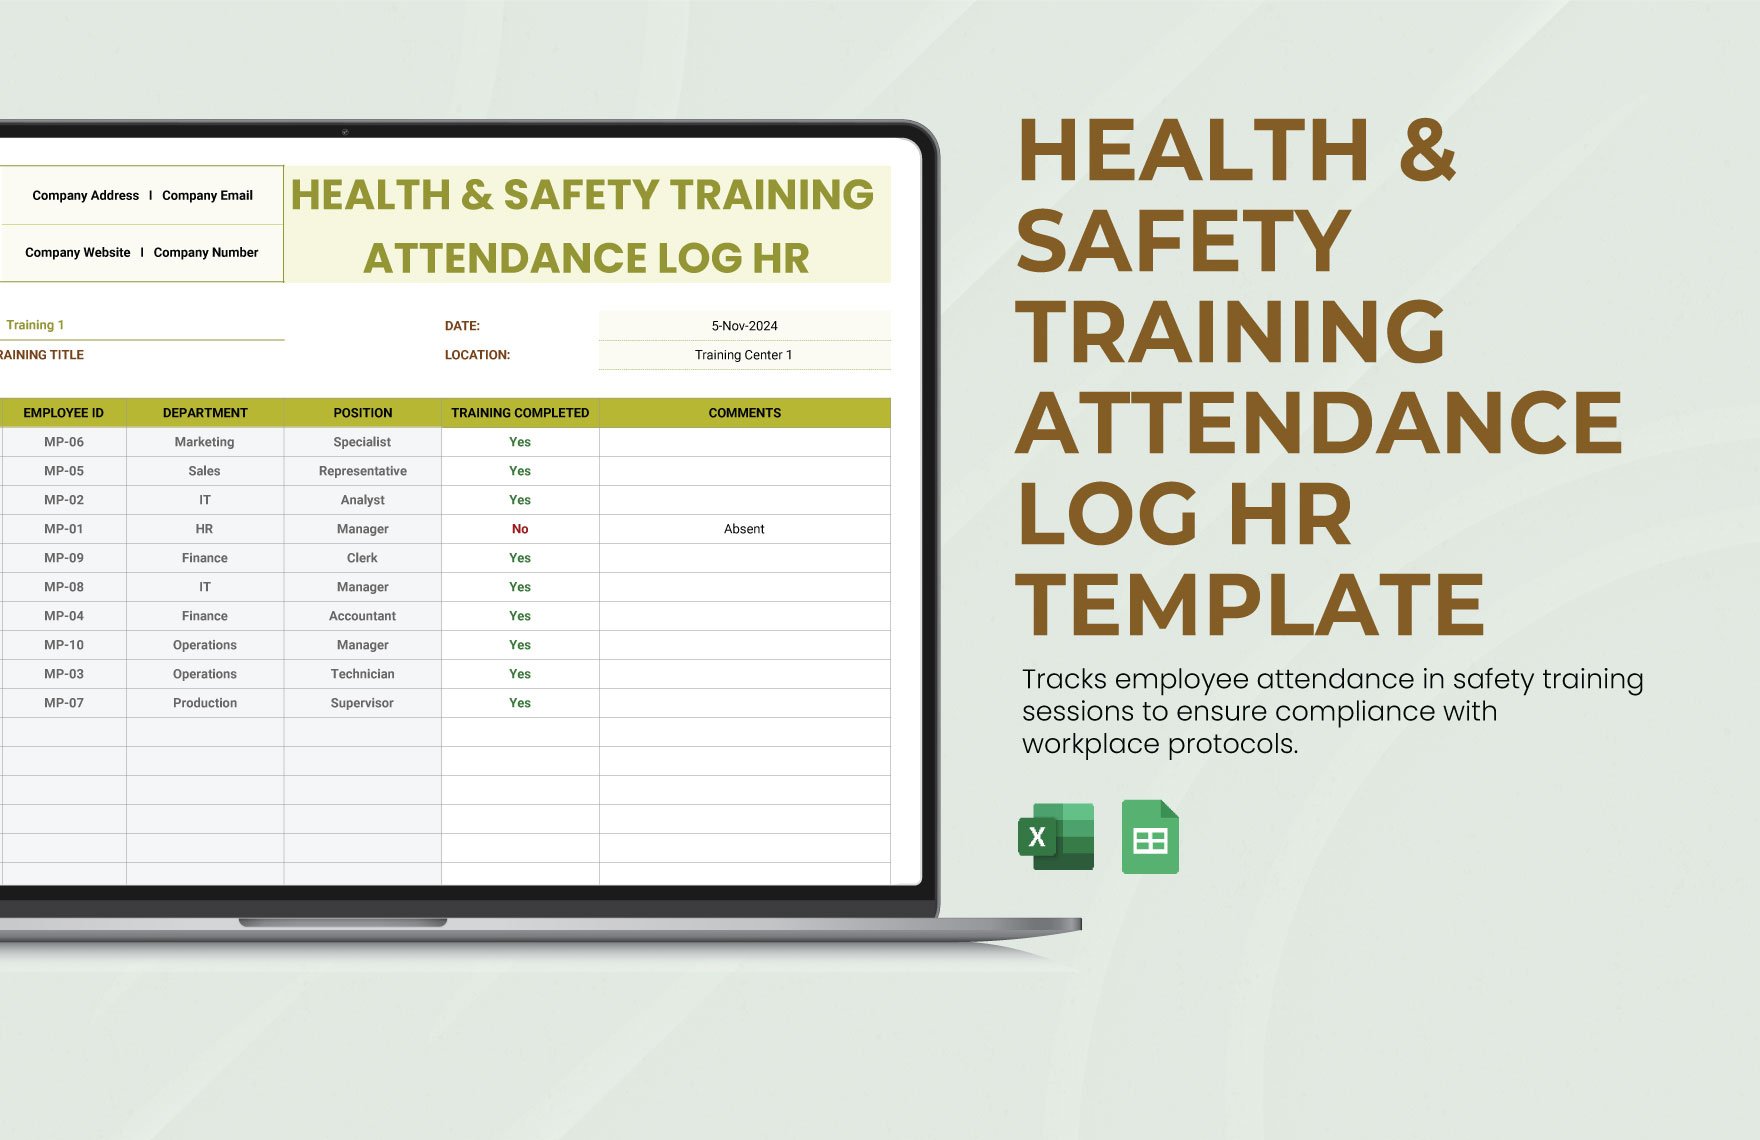 Health & Safety Training Attendance Log HR Template in Excel, Google Sheets